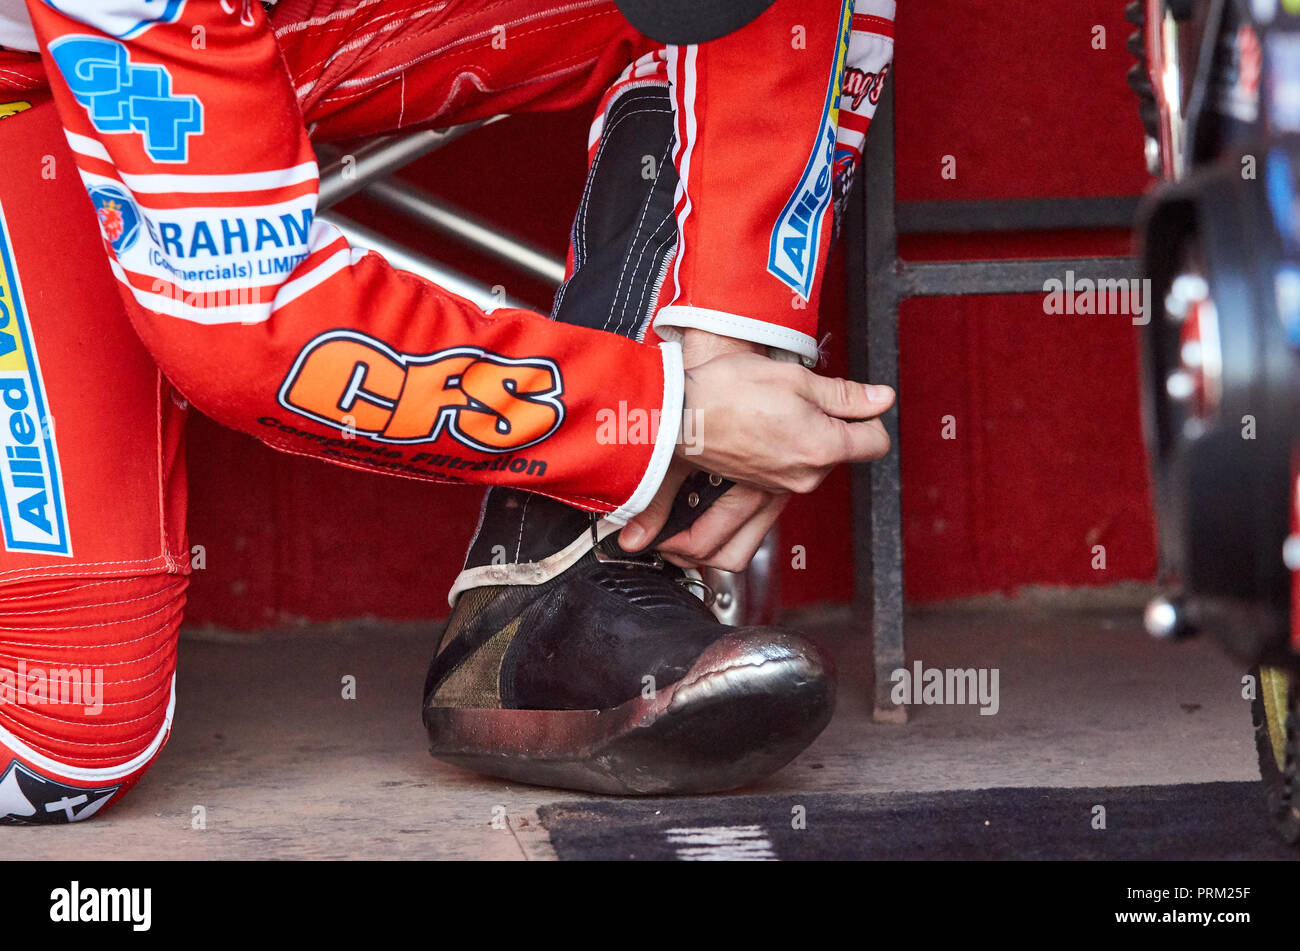 Glasgow Tigers speedway rider prepares for his turn during the match against Newcastle Diamonds Stock Photo